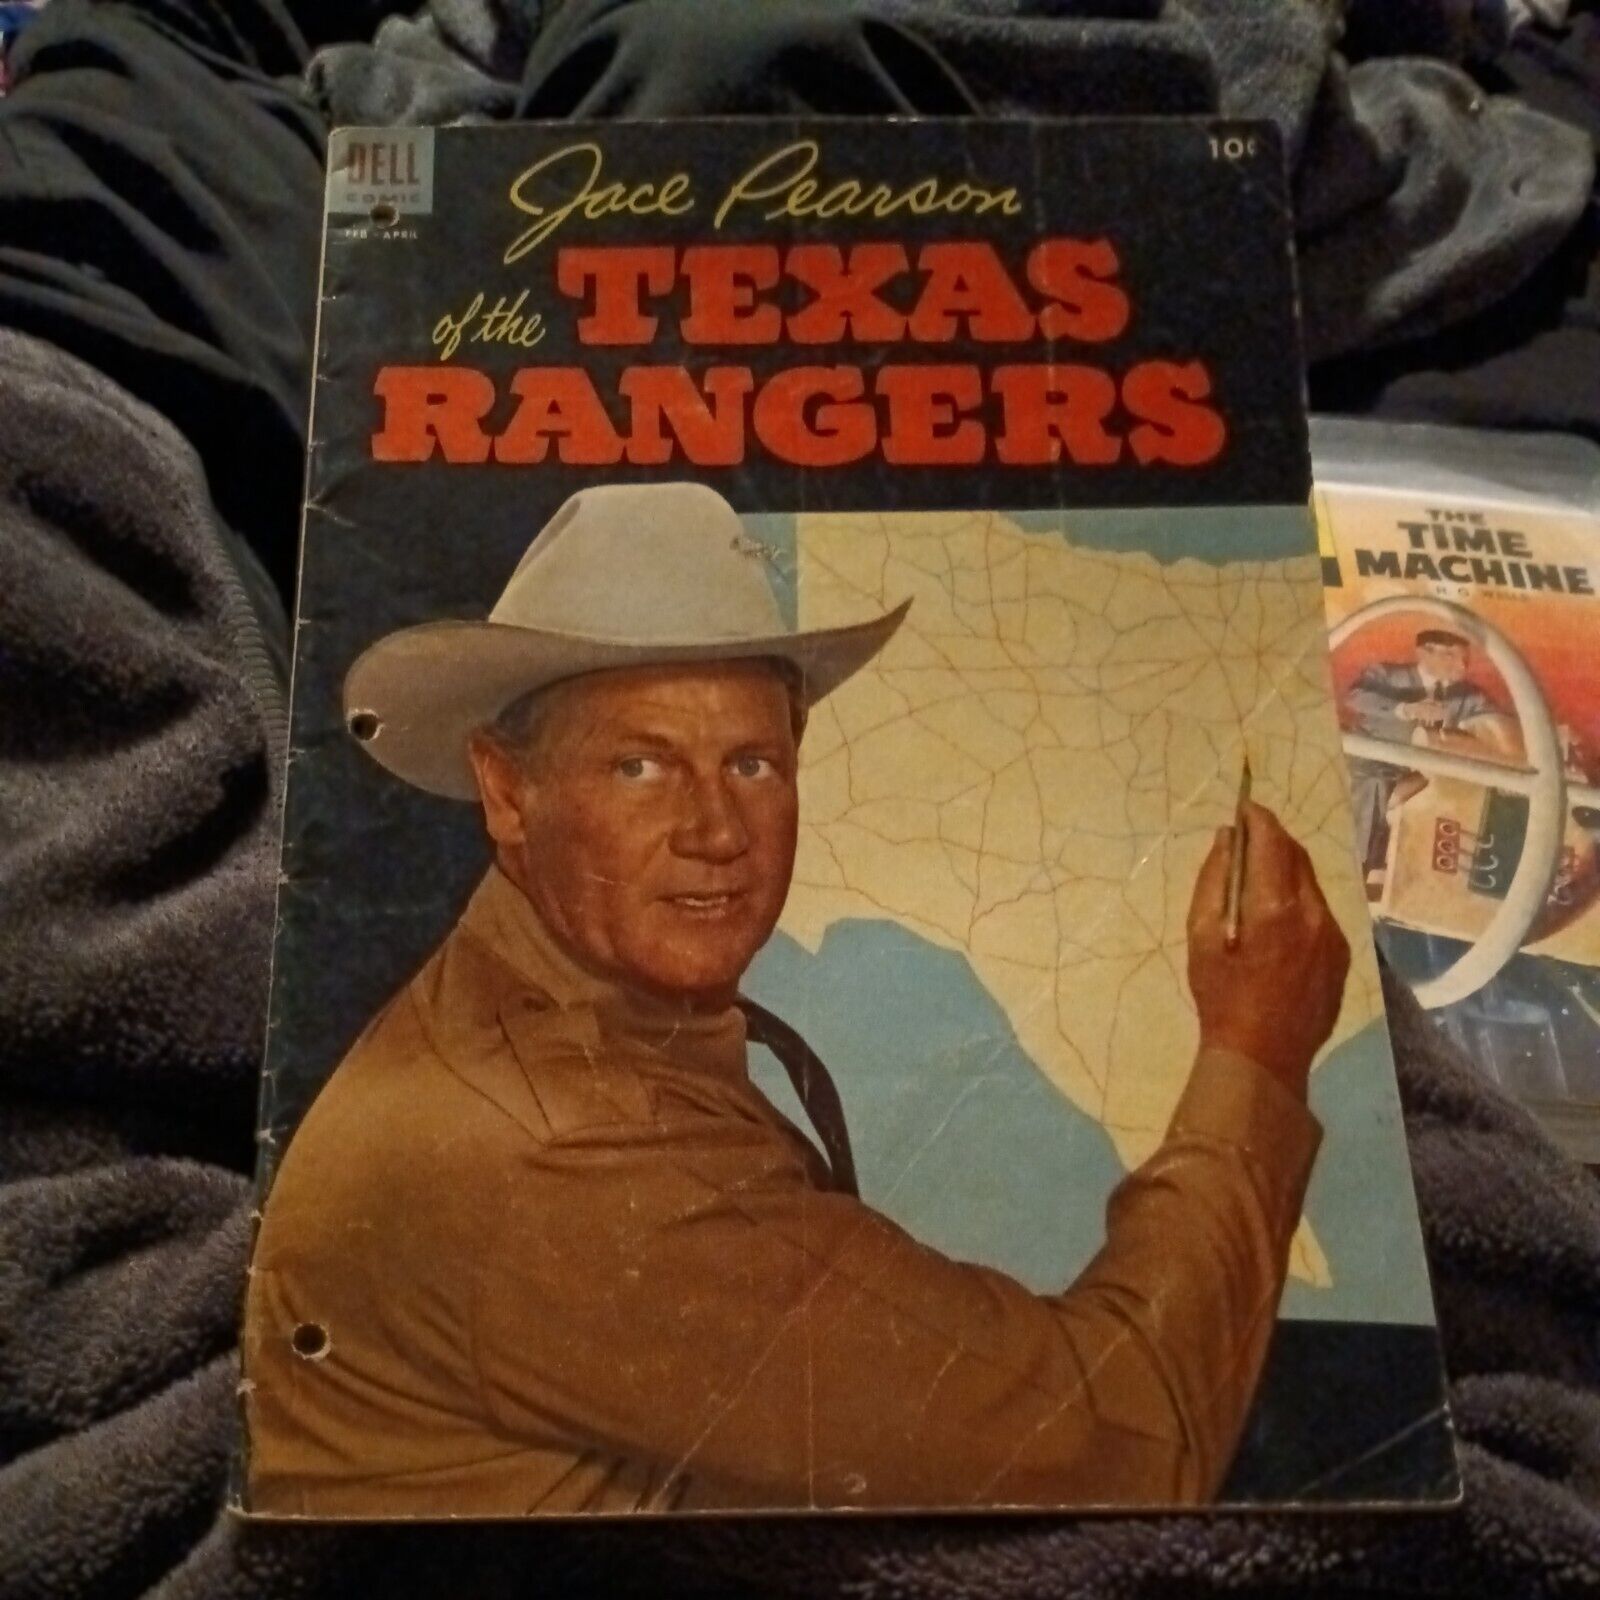 JACE PEARSON OF THE TEXAS RANGERS (1952 Series) #5 Golden age western Dell comic